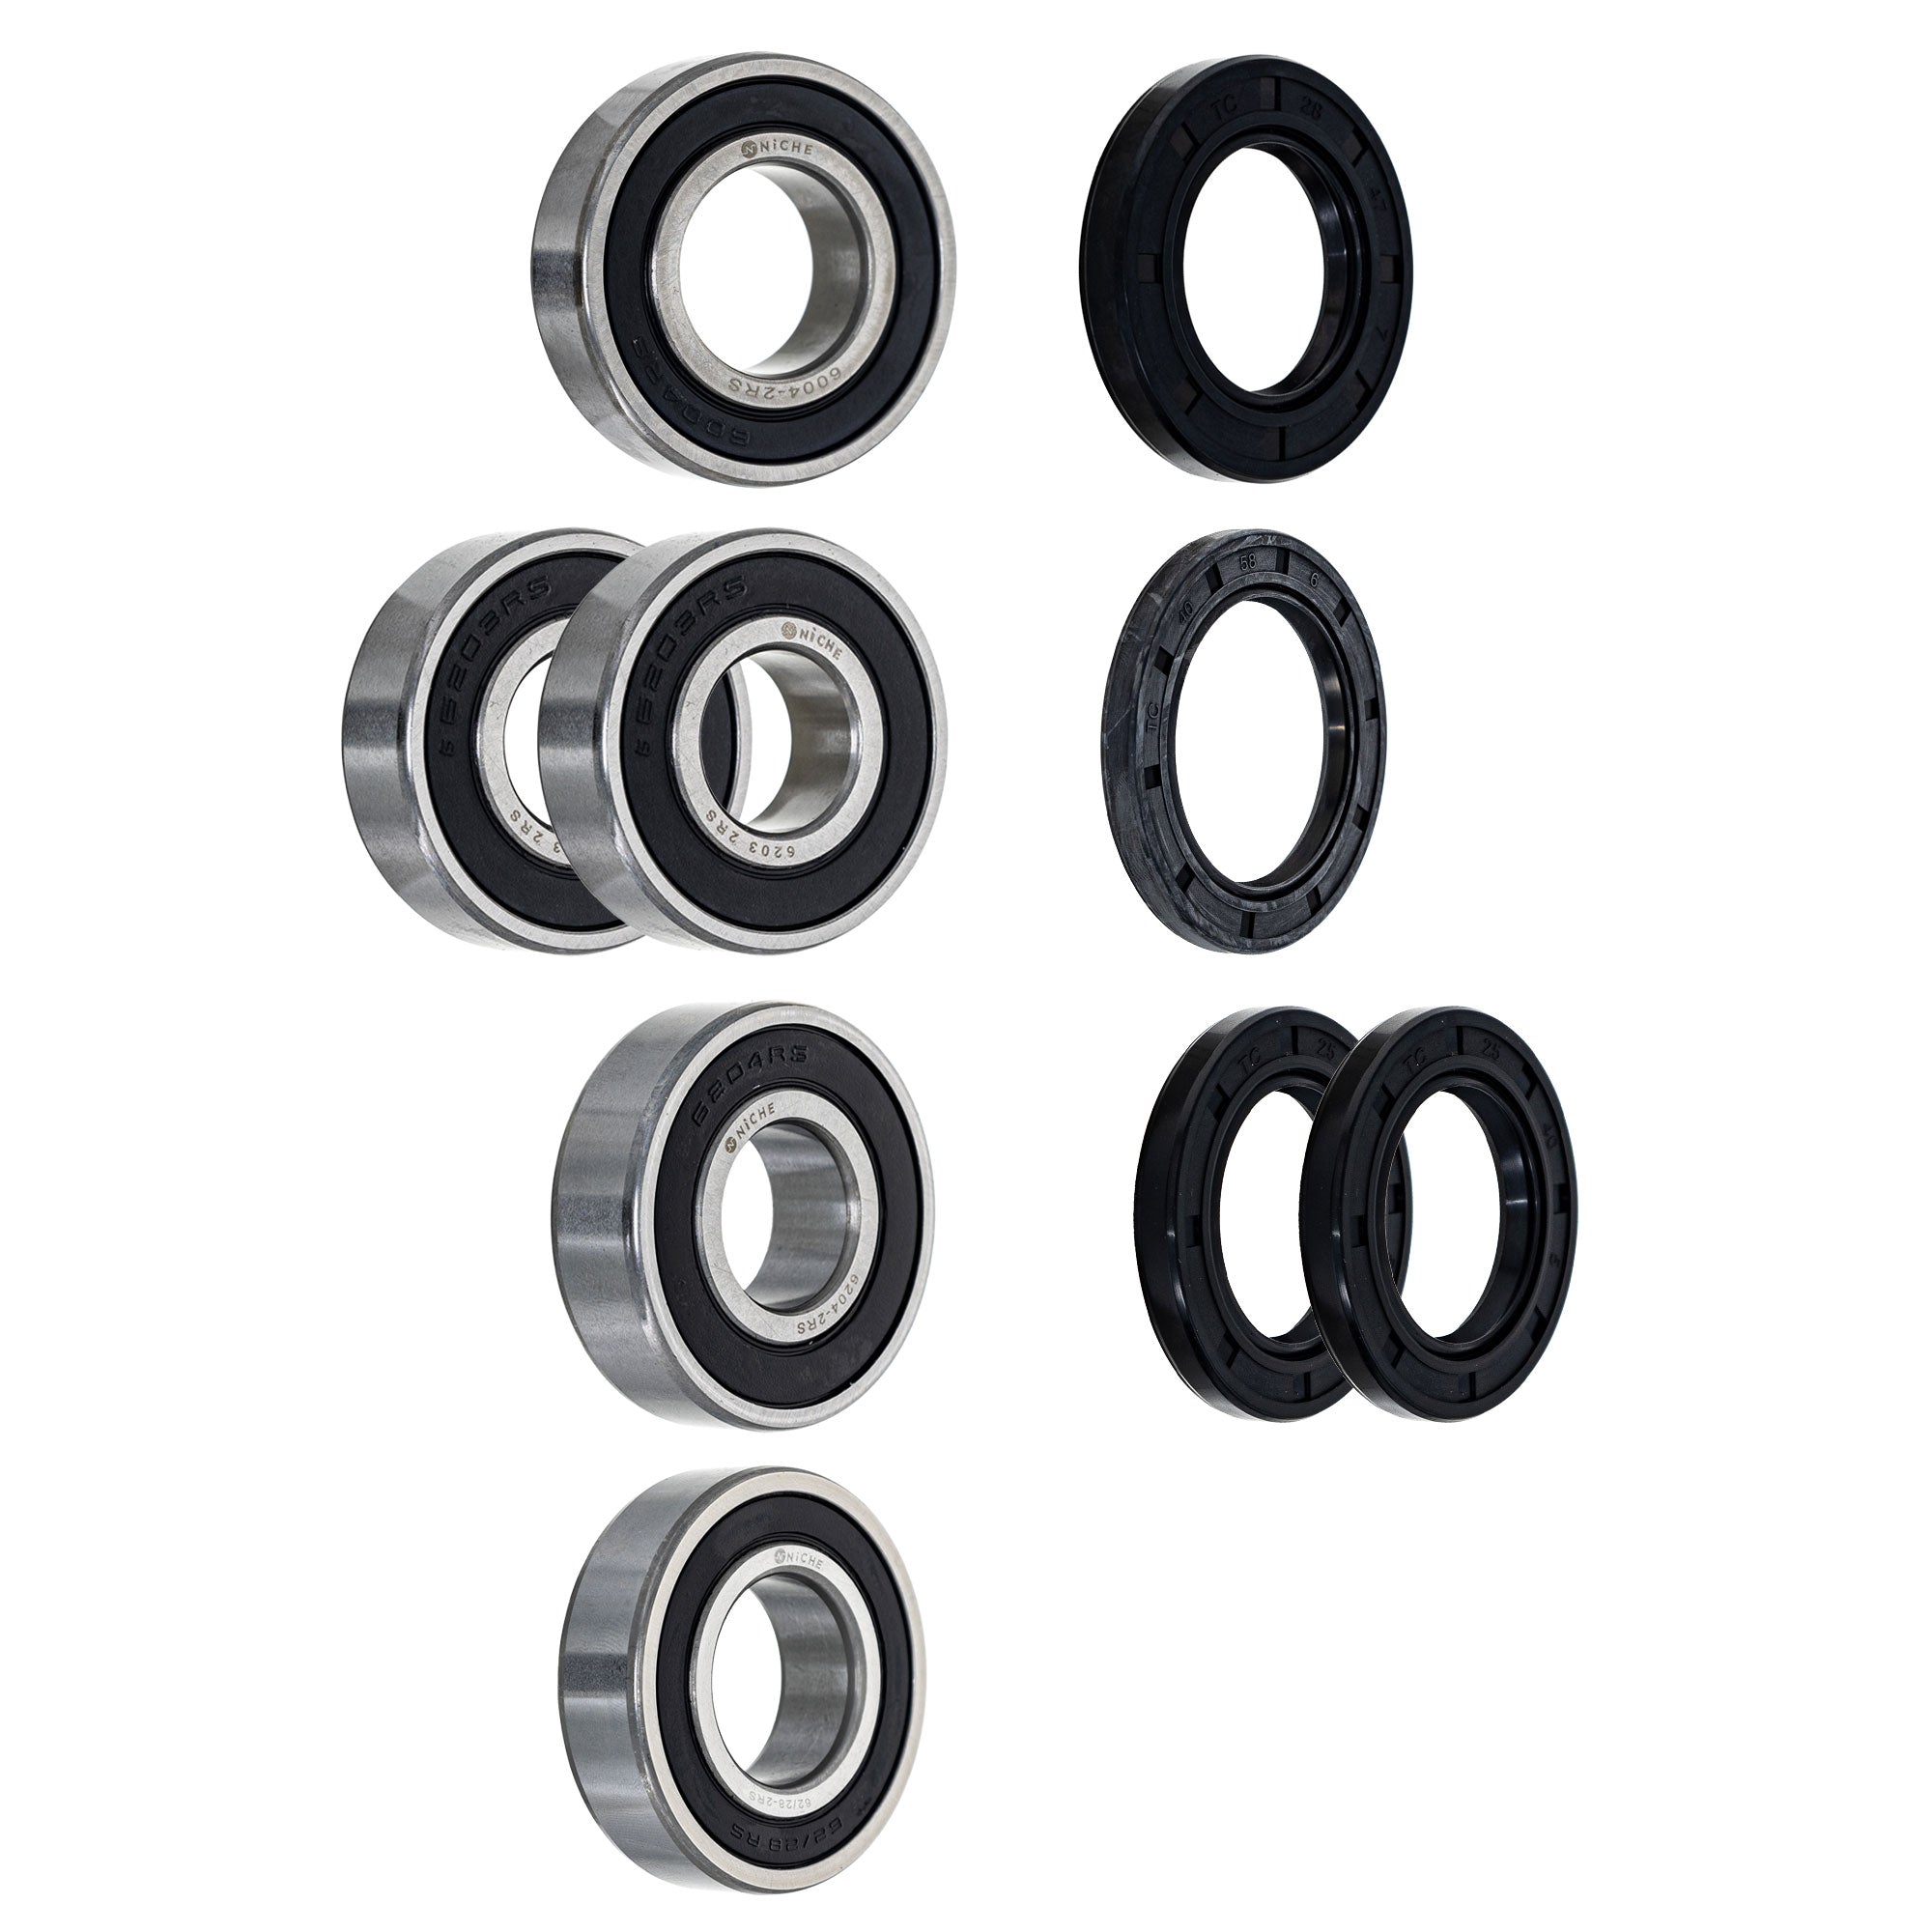 Wheel Bearing Seal Kit for zOTHER Ref No XSR900 XSR700 Tracer FZ09 NICHE MK1008655